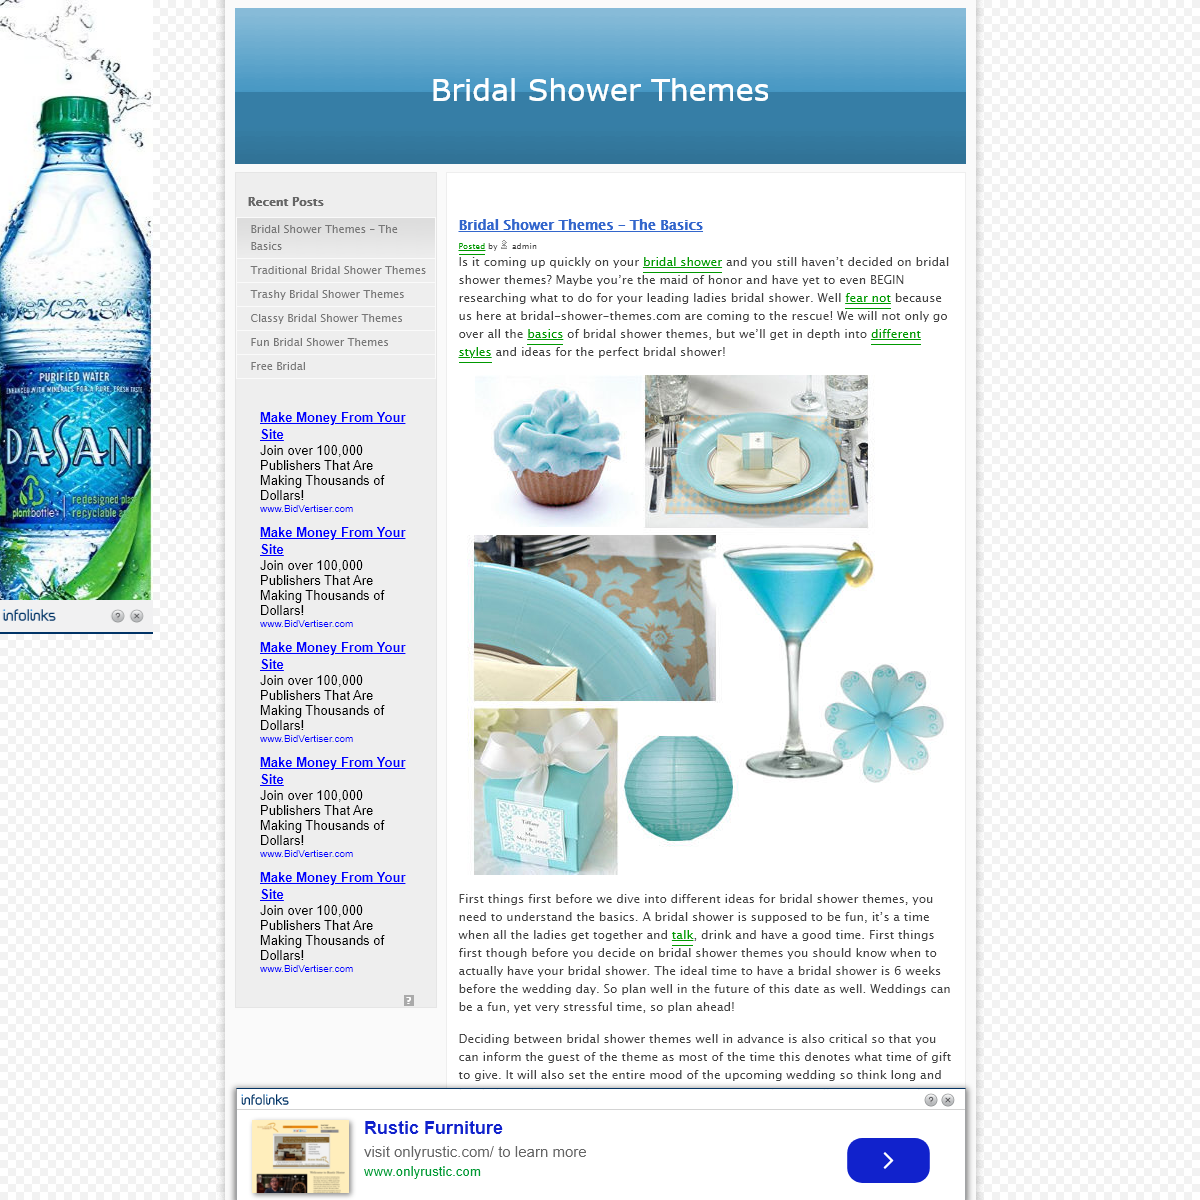 A complete backup of bridal-shower-themes.com